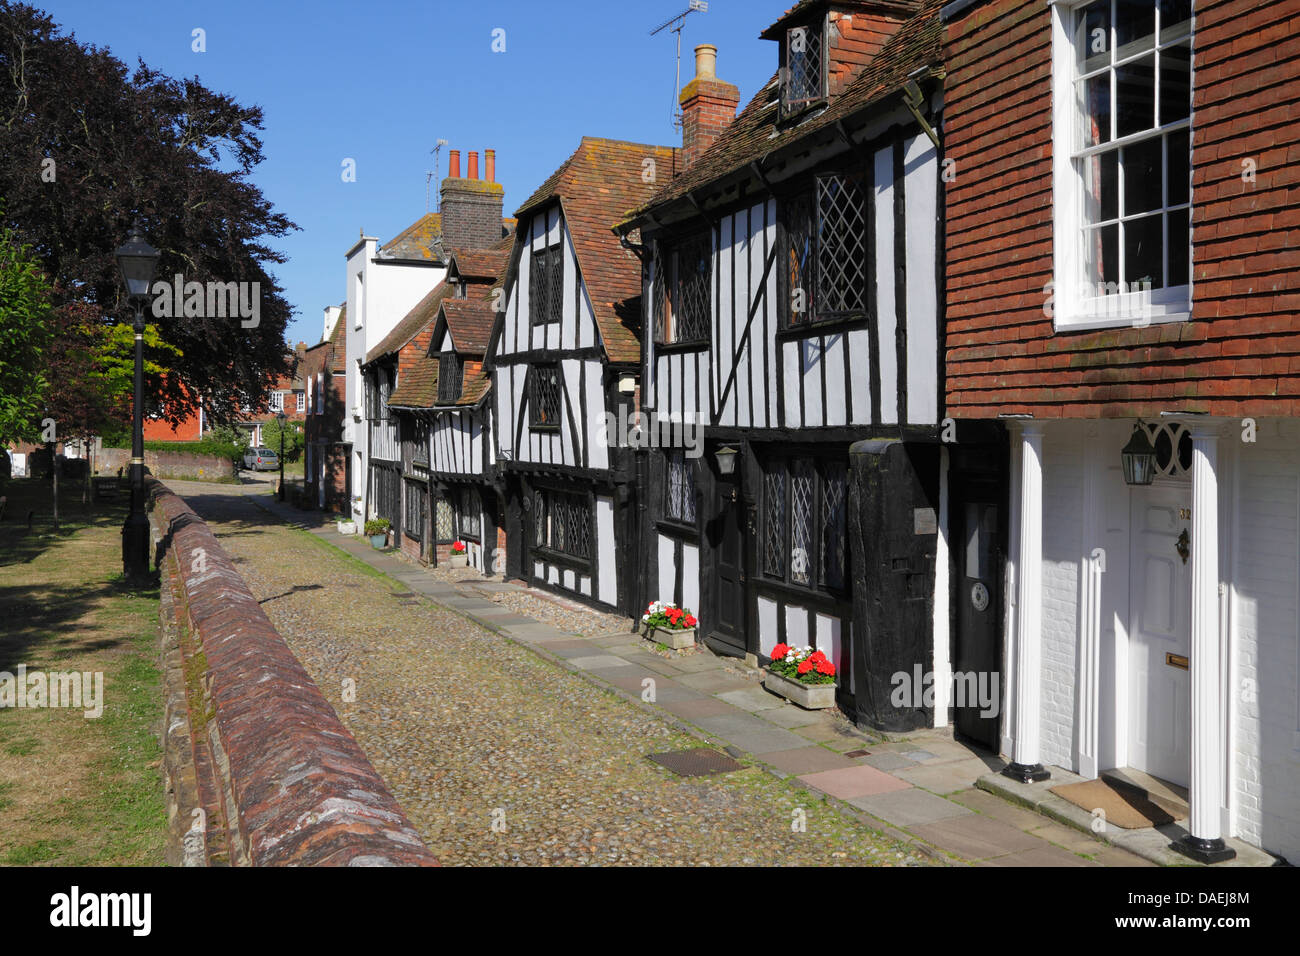 Medieval Tudor timber framed houses in Church Square, Rye East Sussex, England, UK, GB Stock Photo